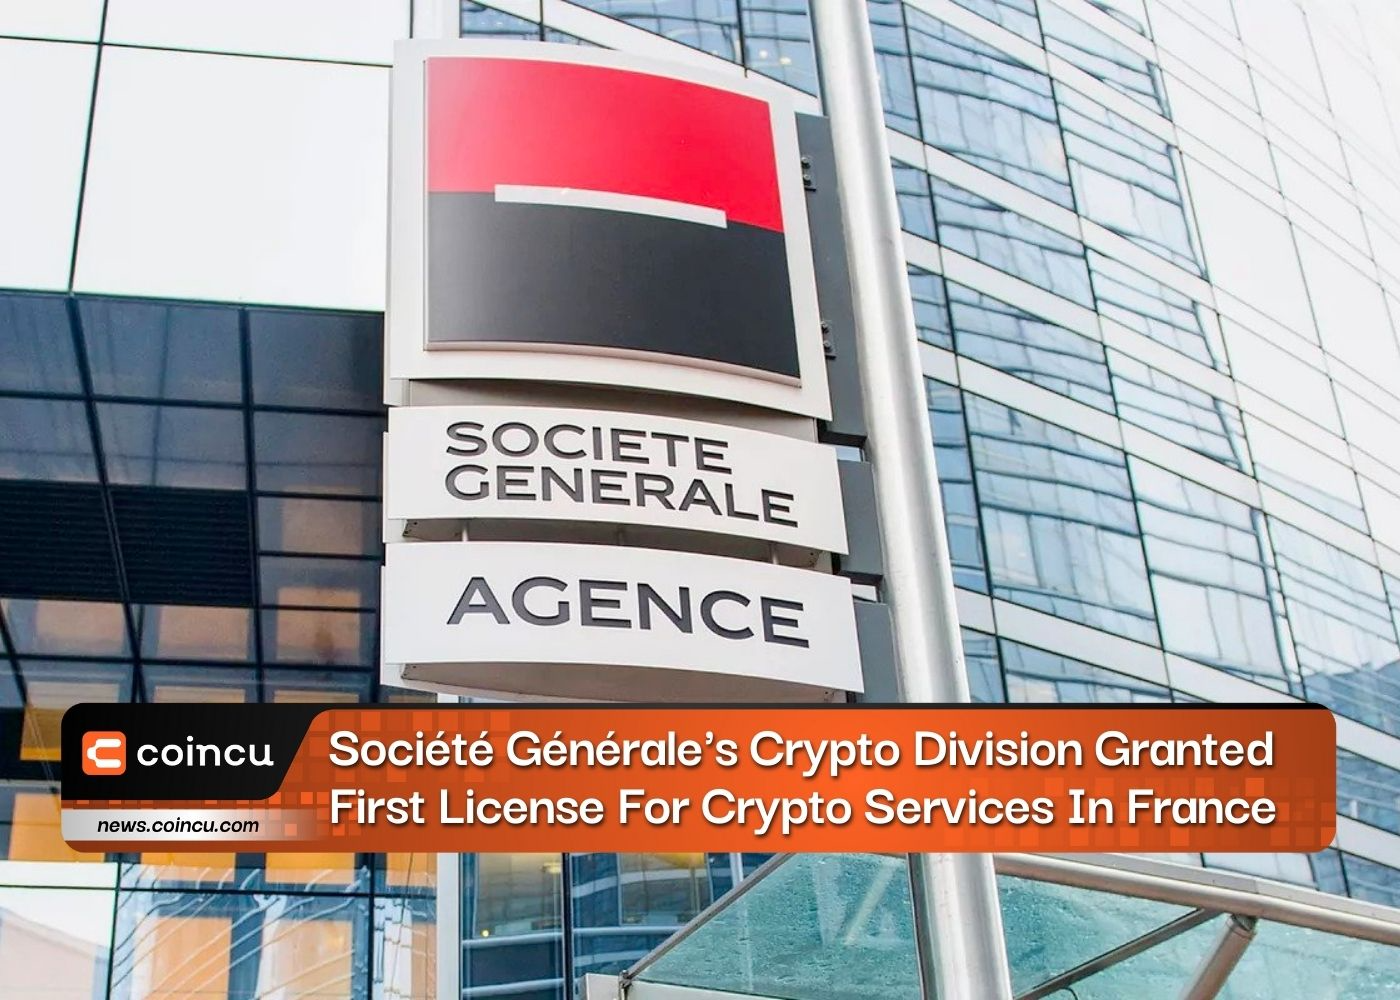 Société Générale’s Crypto Division Granted First License For Crypto Services In France